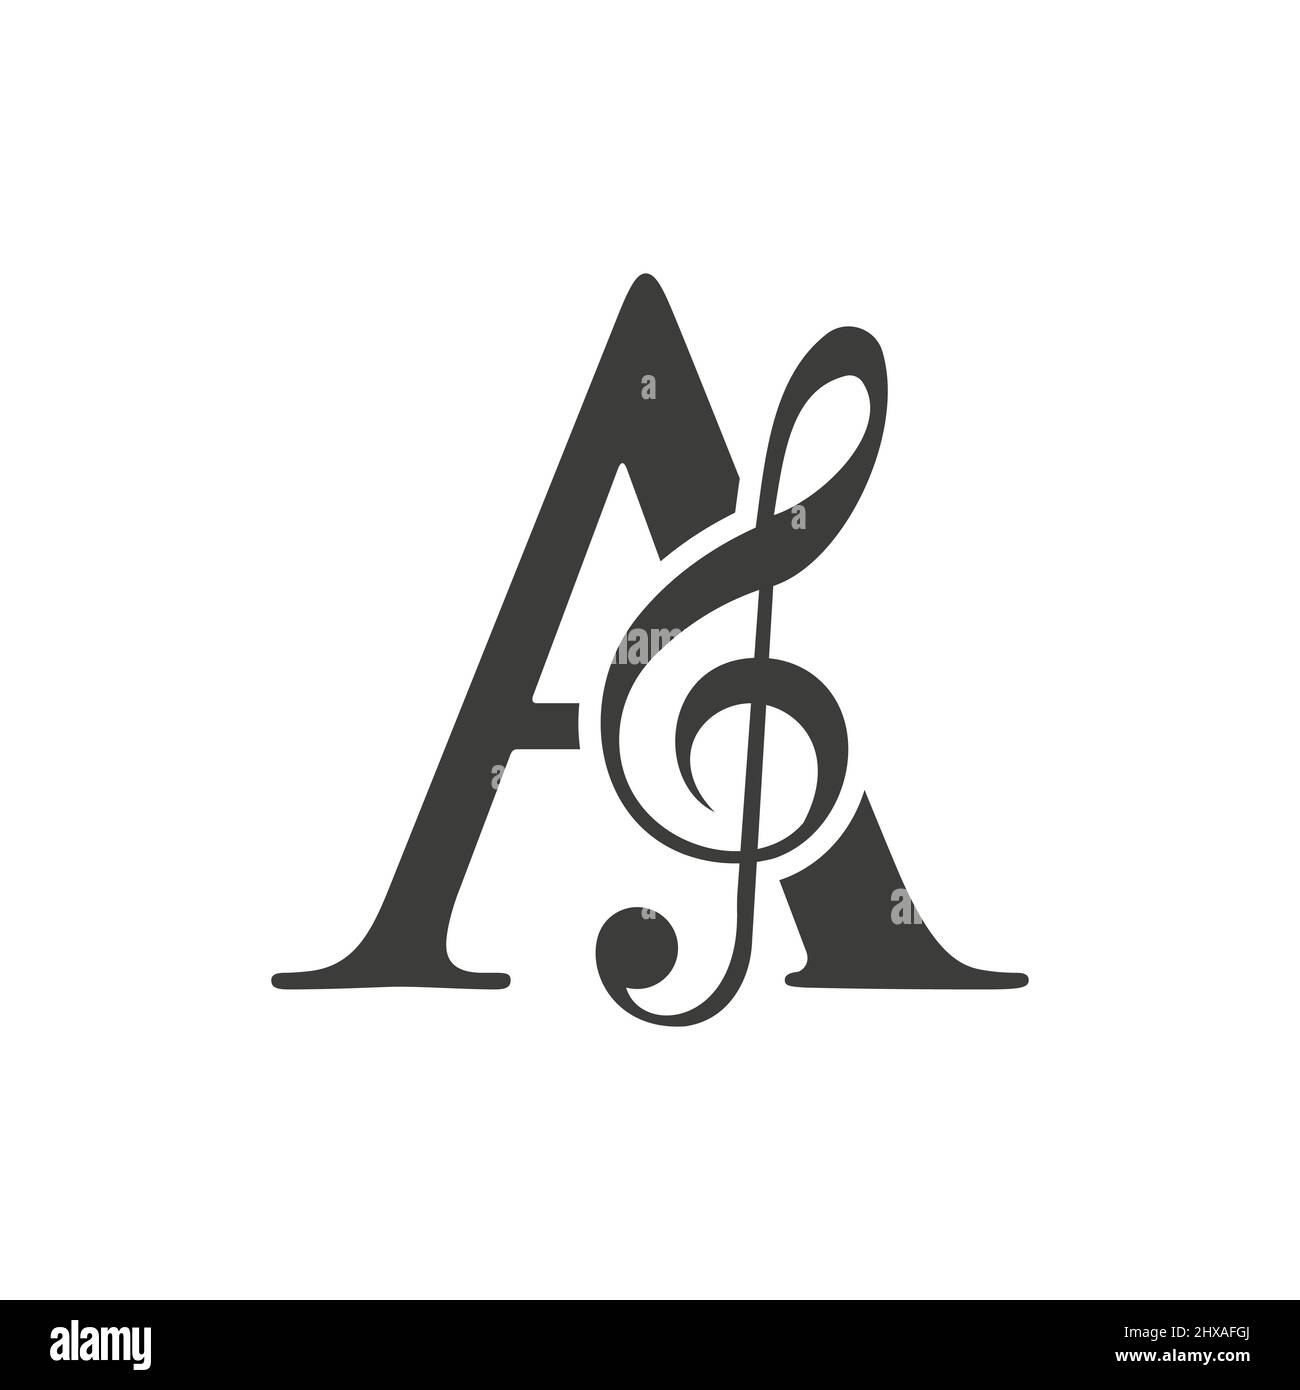 Music Logo On Letter A Concept. A Music Note Sign, Sound Music Melody Template Stock Vector